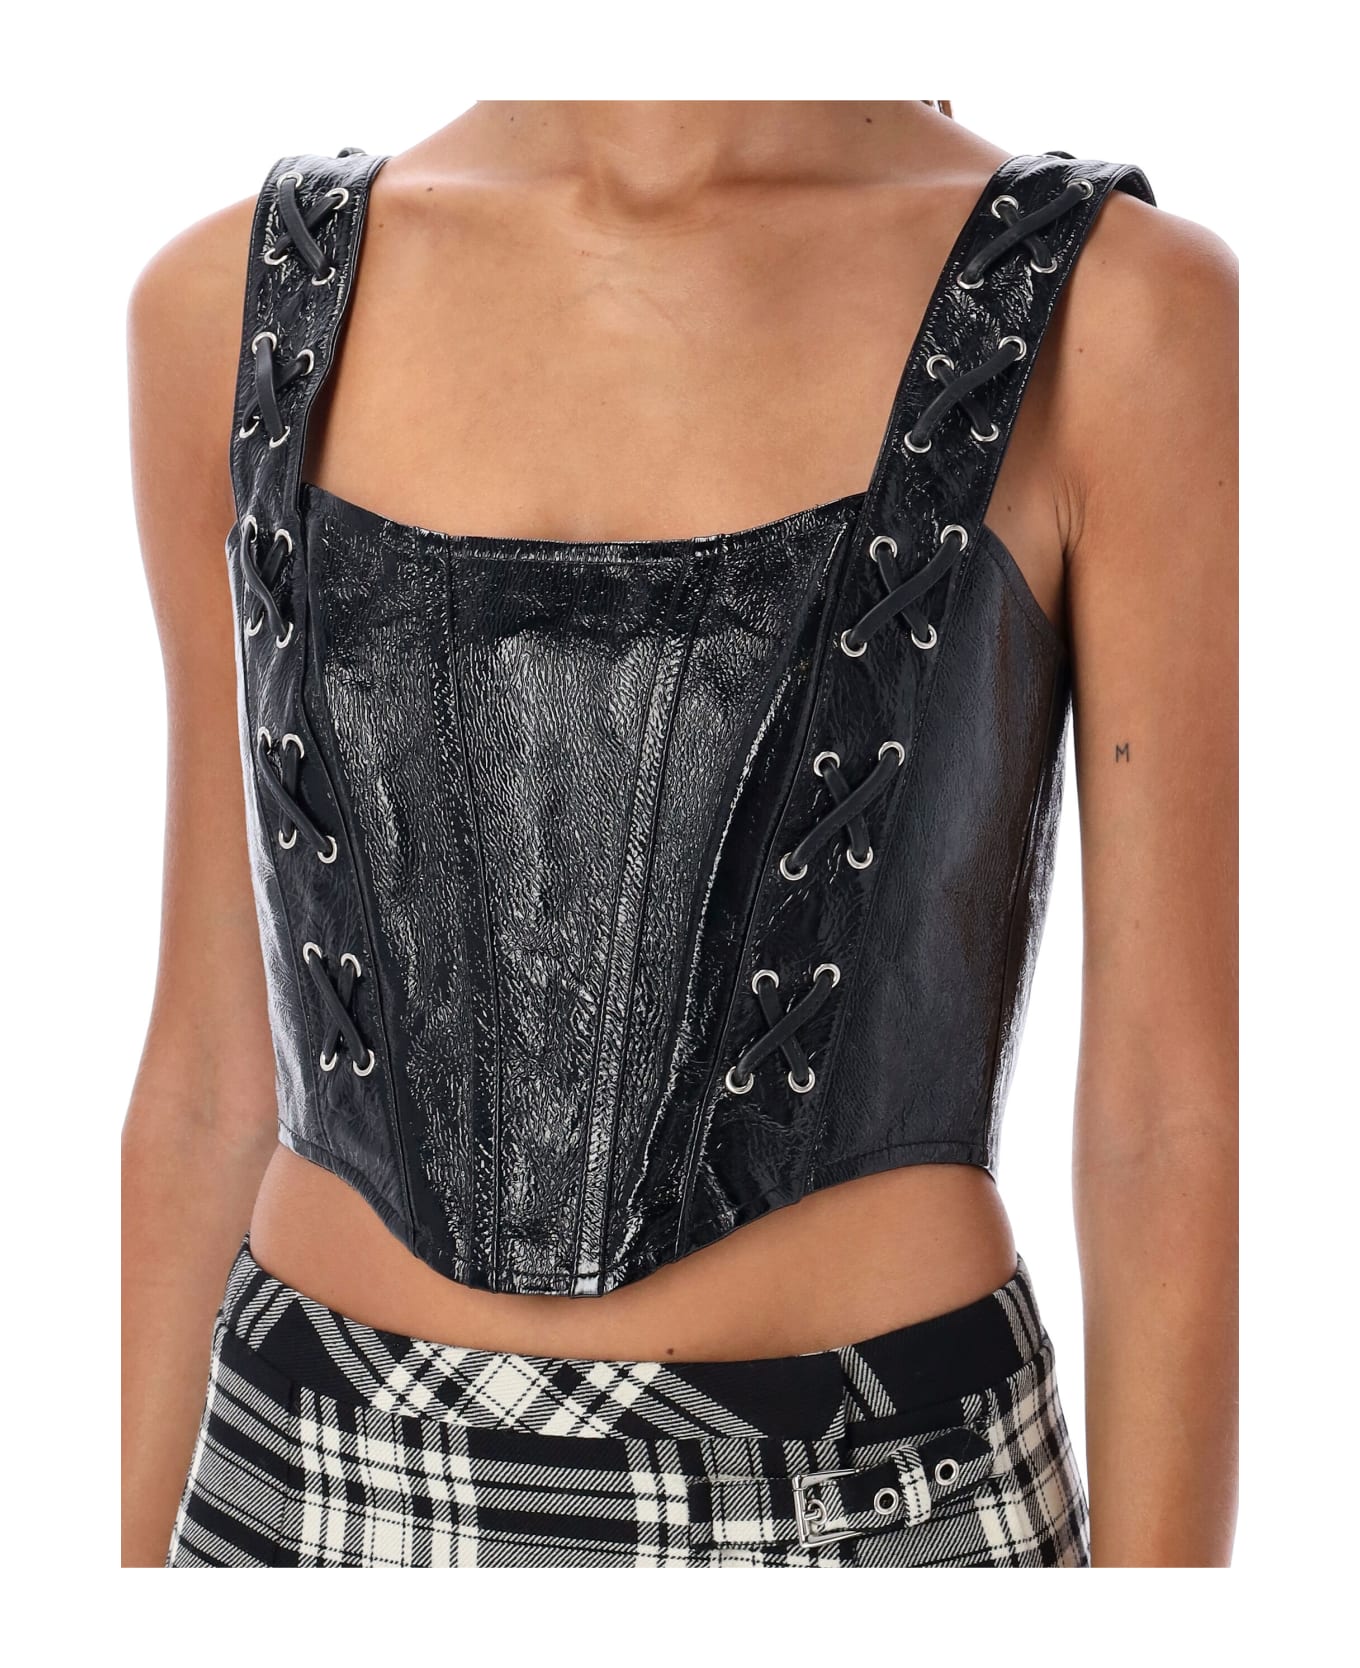 Alessandra Rich Patent Leather Bustier Top - BLACK